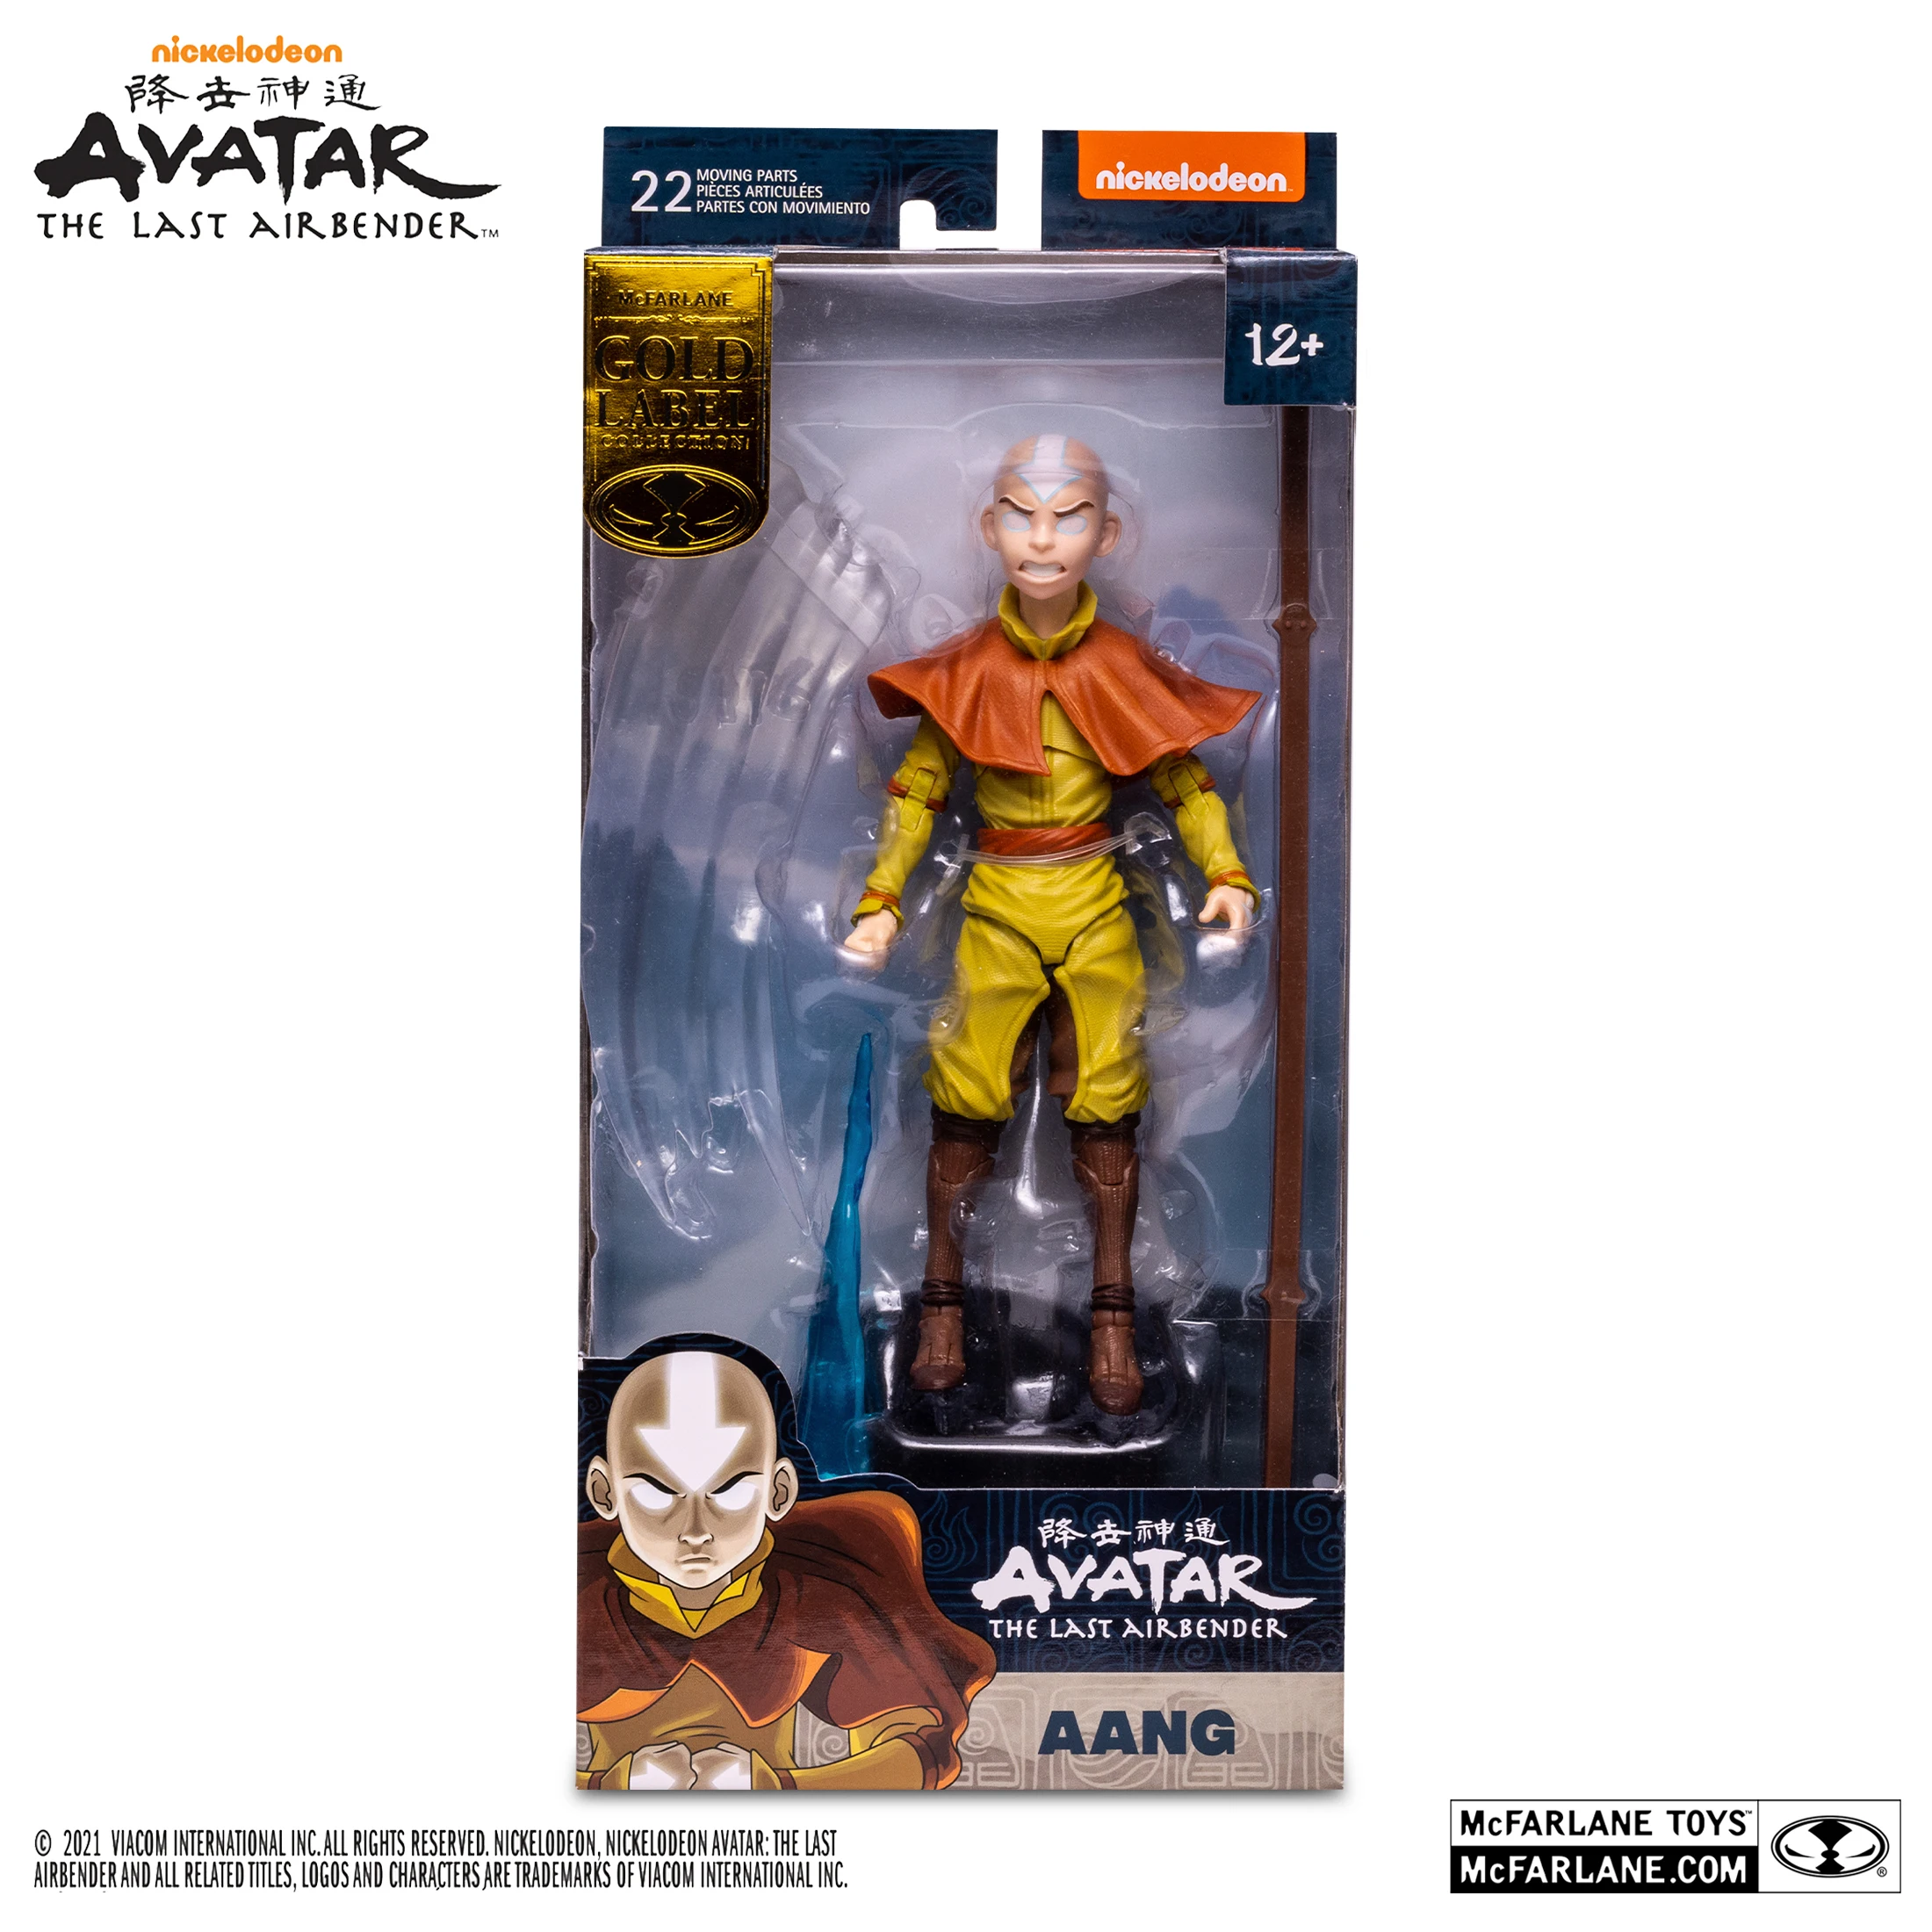 

In Stock Mcfarlane Avatar: The Last Airbender Gold Label Aang (Avatar State) 7 Inch Action Figure Collectible Model Toy Gift